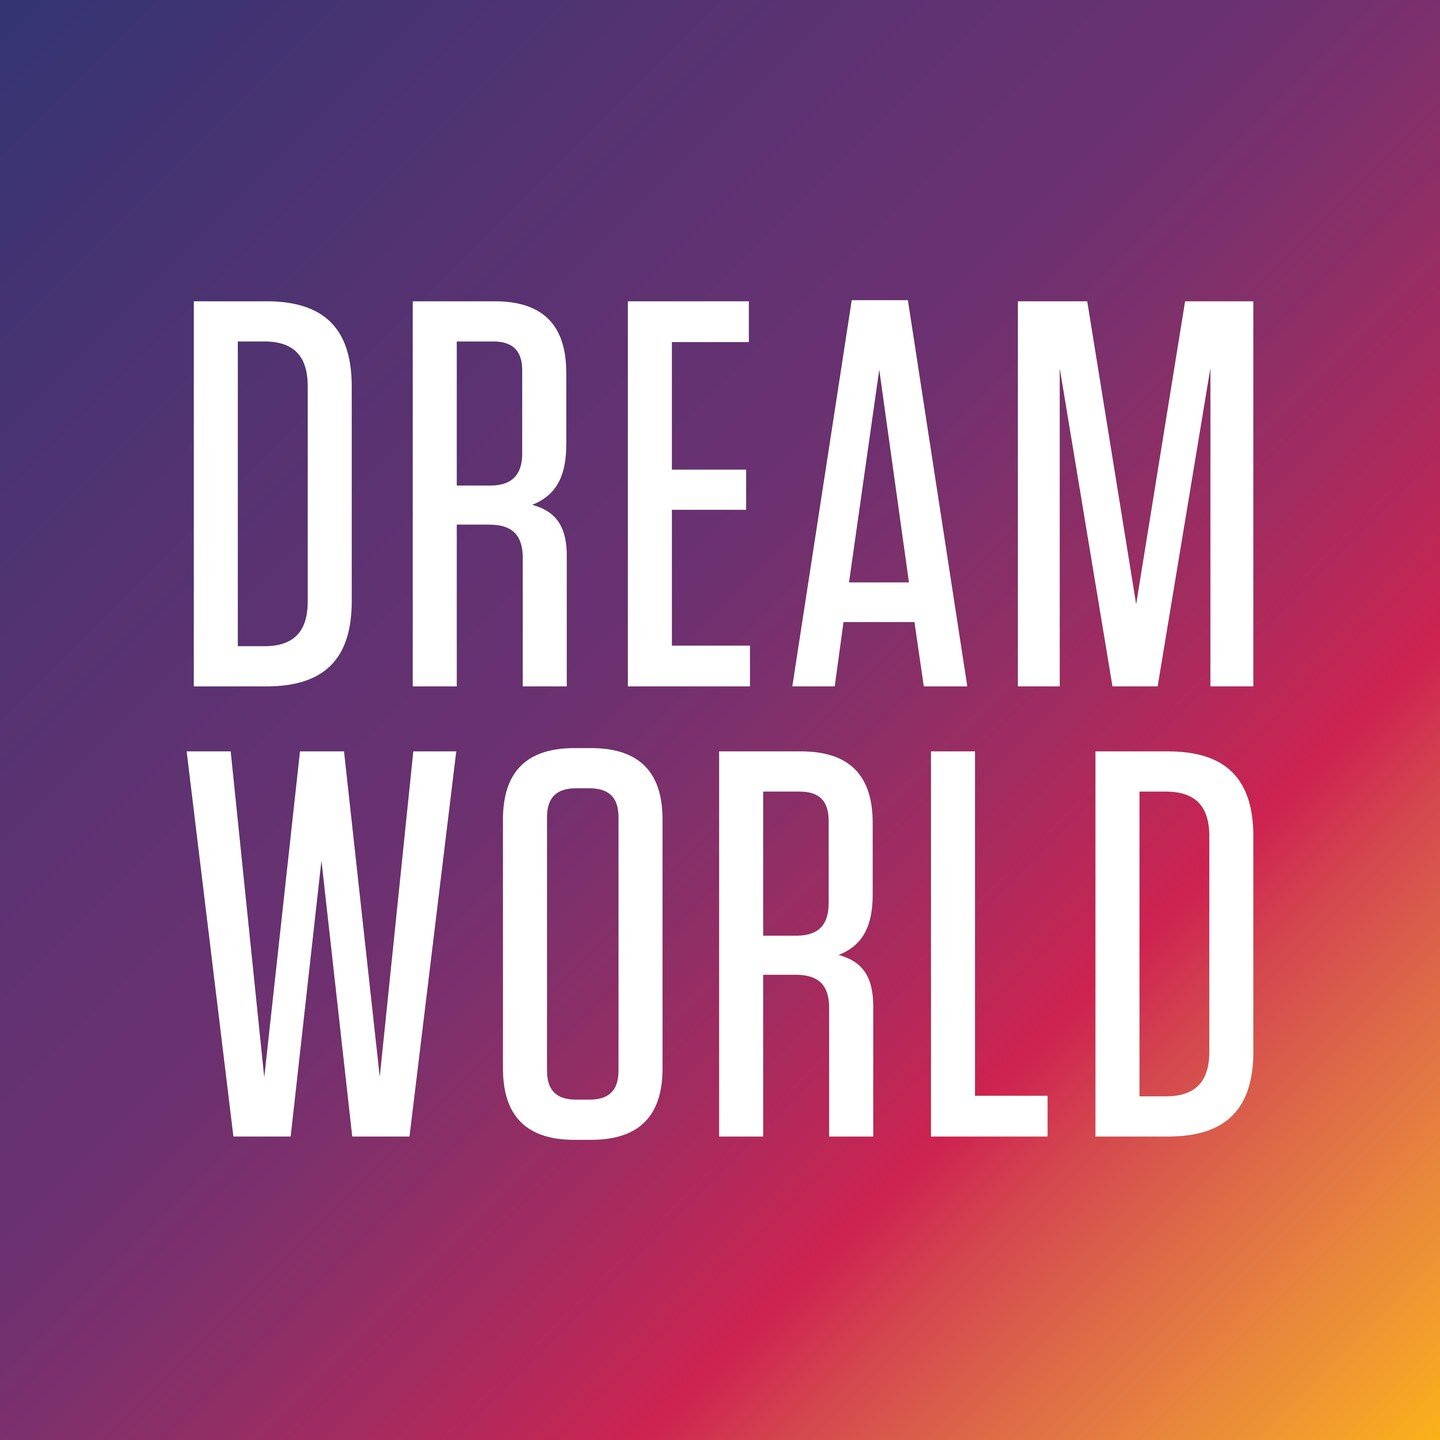 We are thrilled to present DREAM WORLD, a short documentary film about elite technology integrators. Watch and share it at dreamworldfilm.com (link in bio)!

Want to know more? We often struggle to explain all that our teams are capable of. It&rsquo;